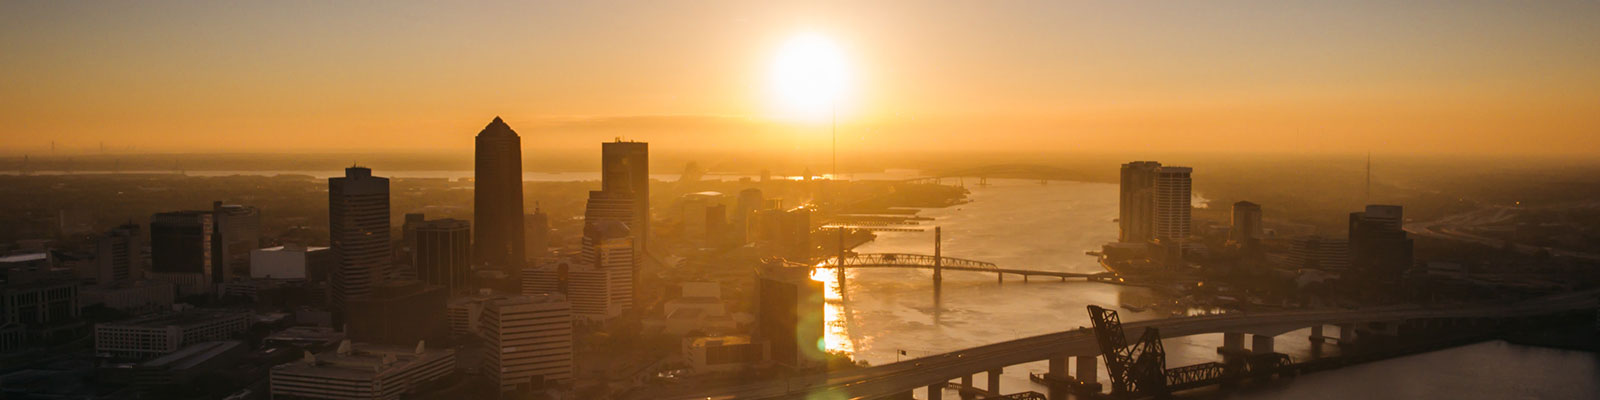 aerial scene of jacksonville city with its bridges and a sunset in the backdrop